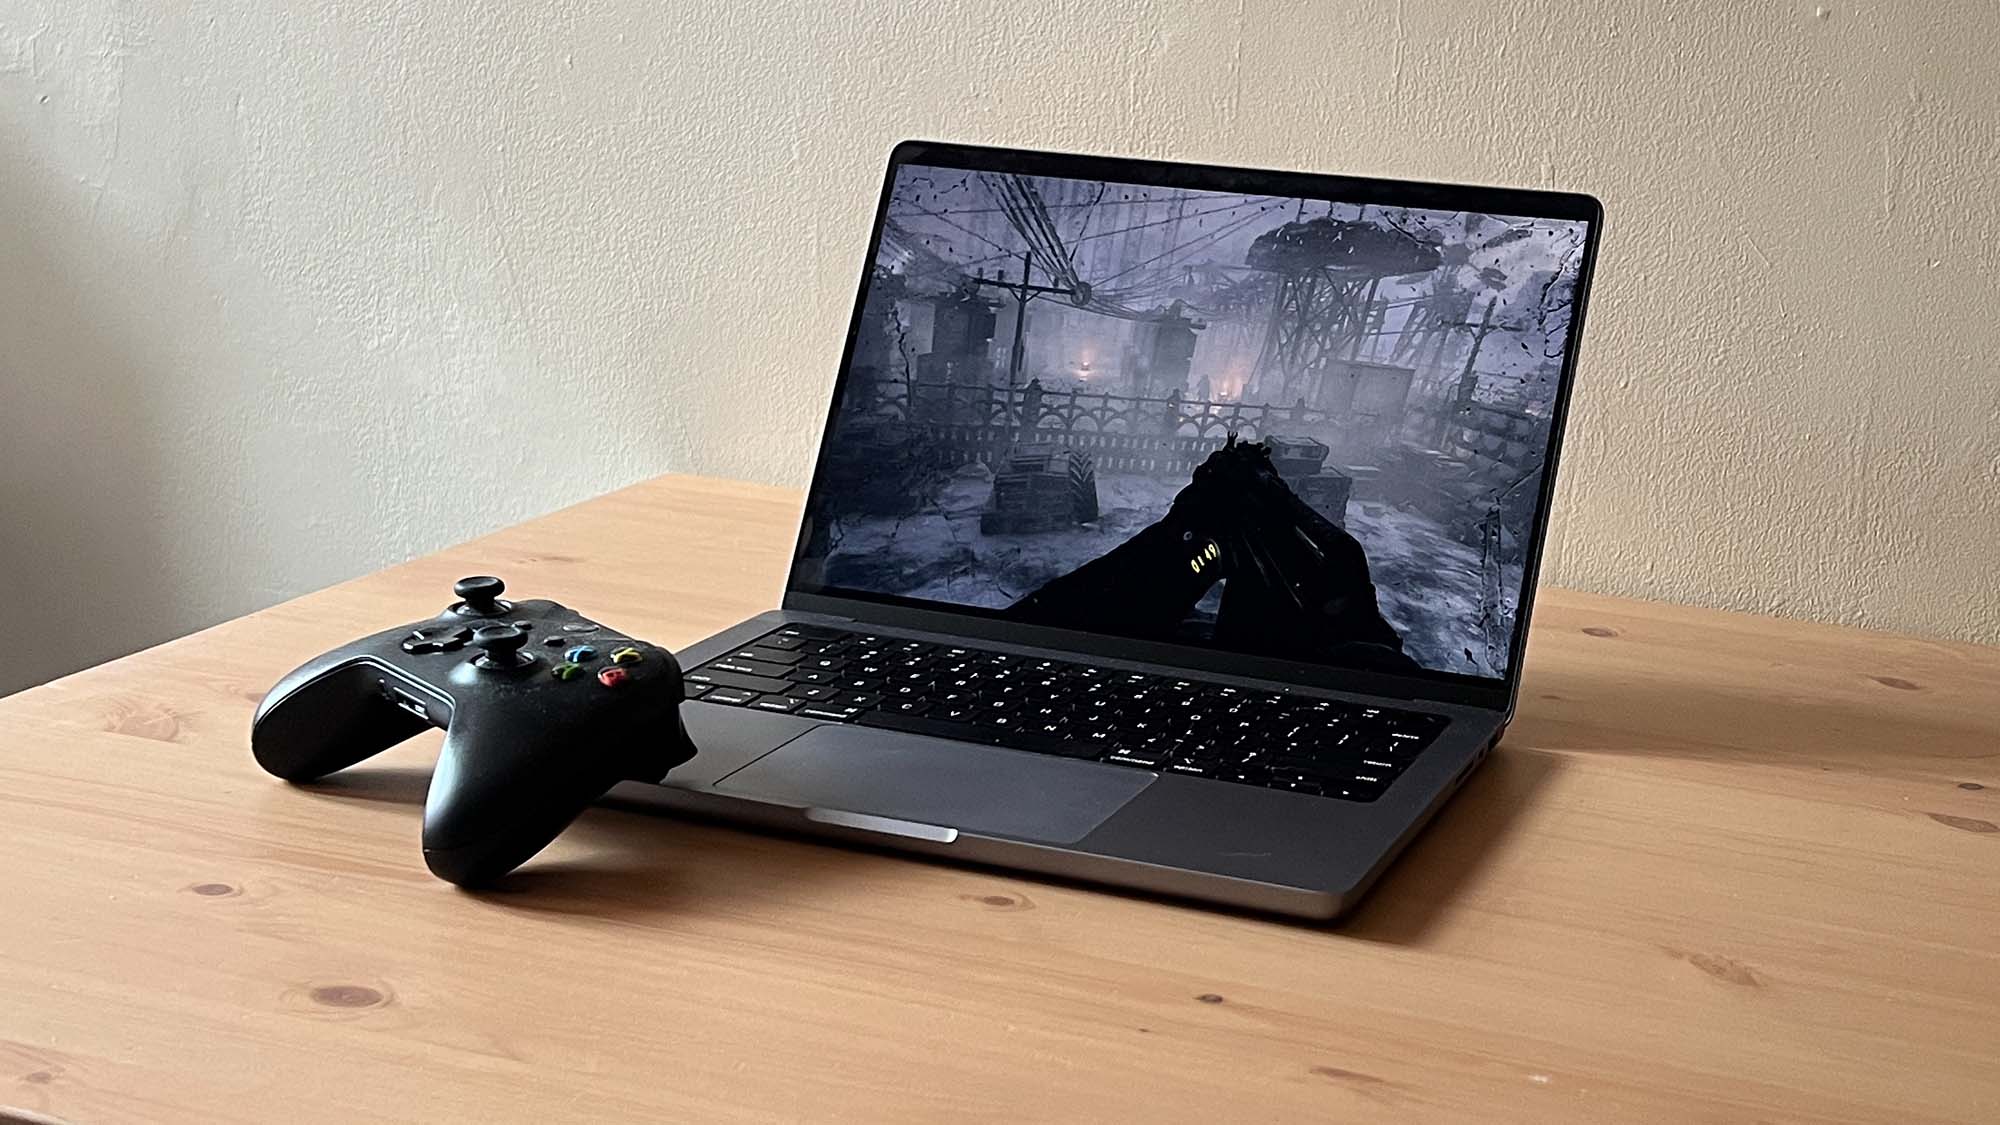 Why Doesn’t Apple Make A Gaming Laptop